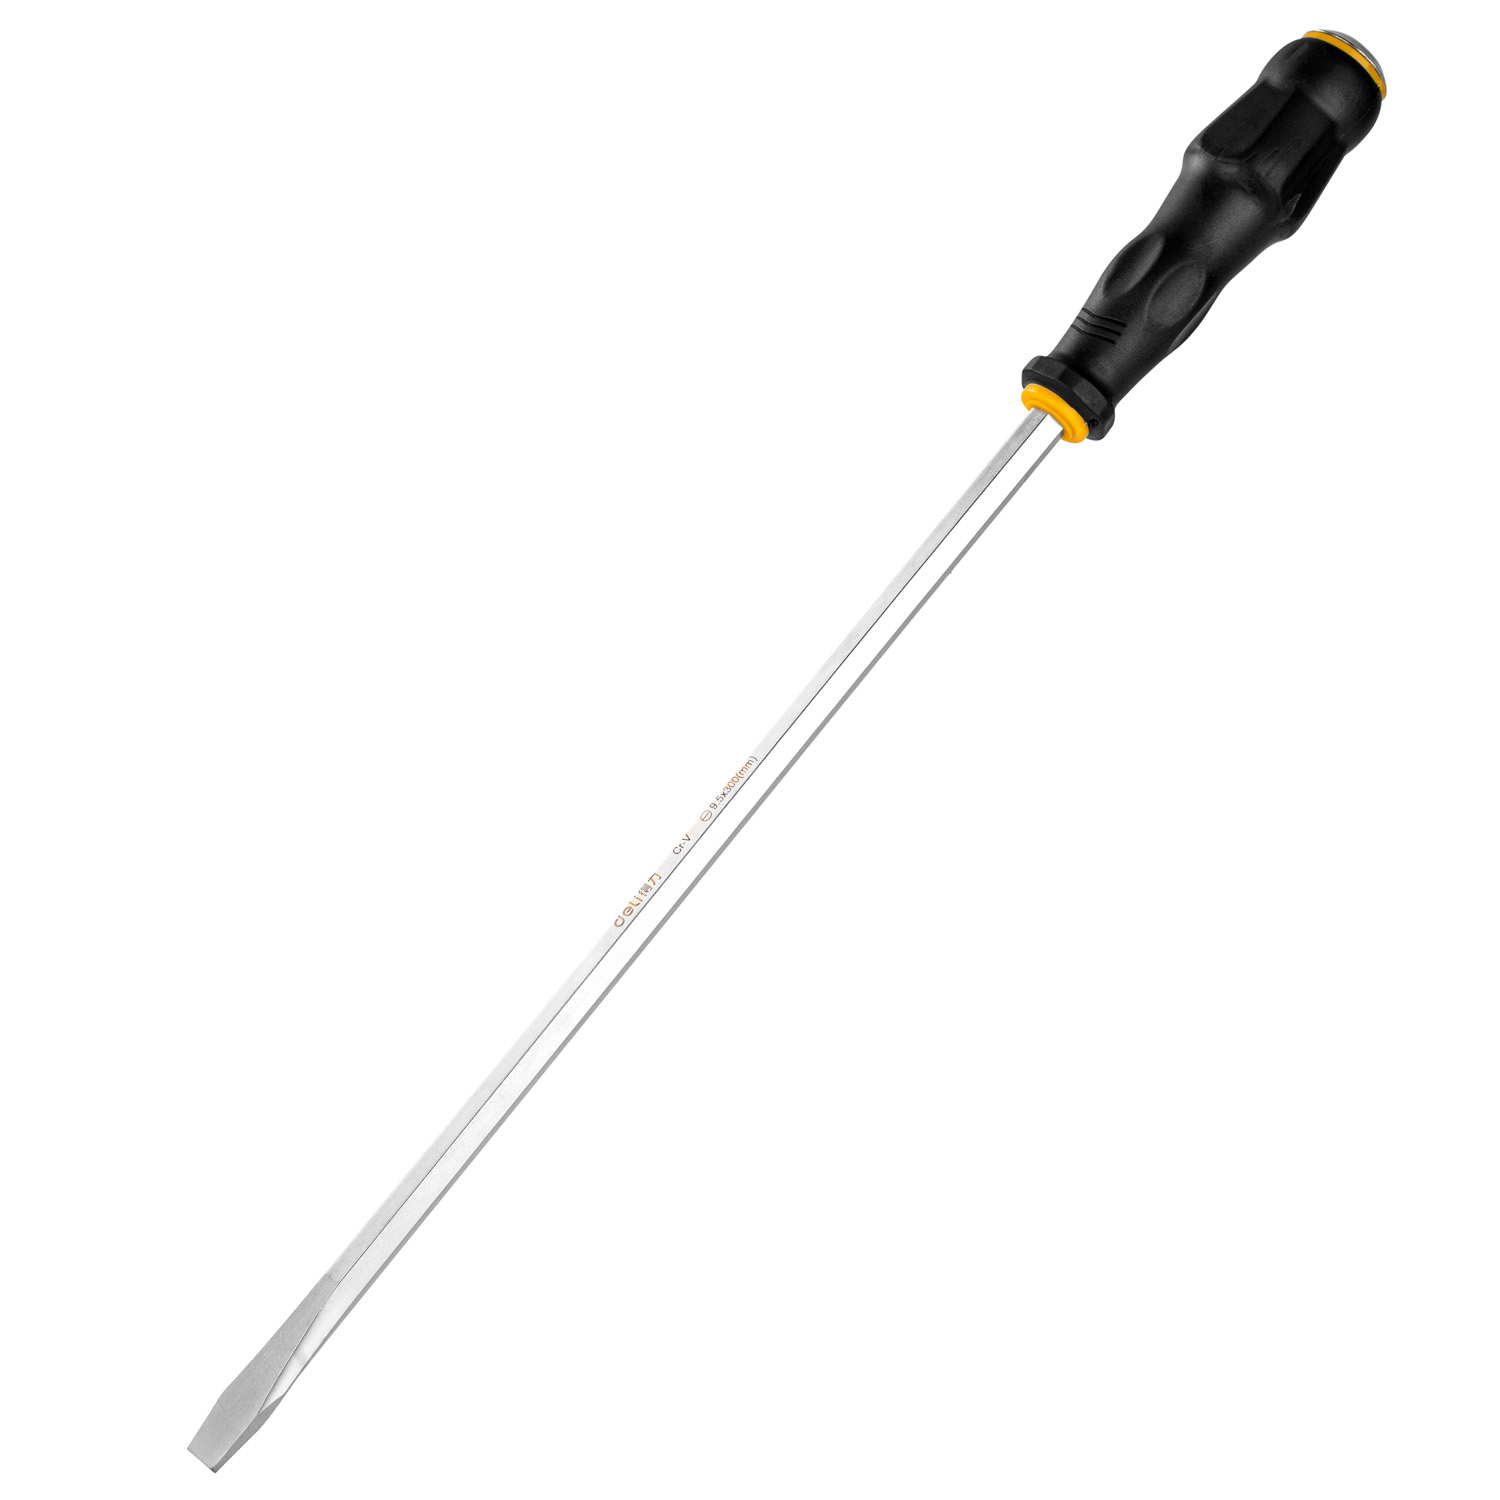 Slotted Screwdriver with Pass-thru Shank 8*200mm